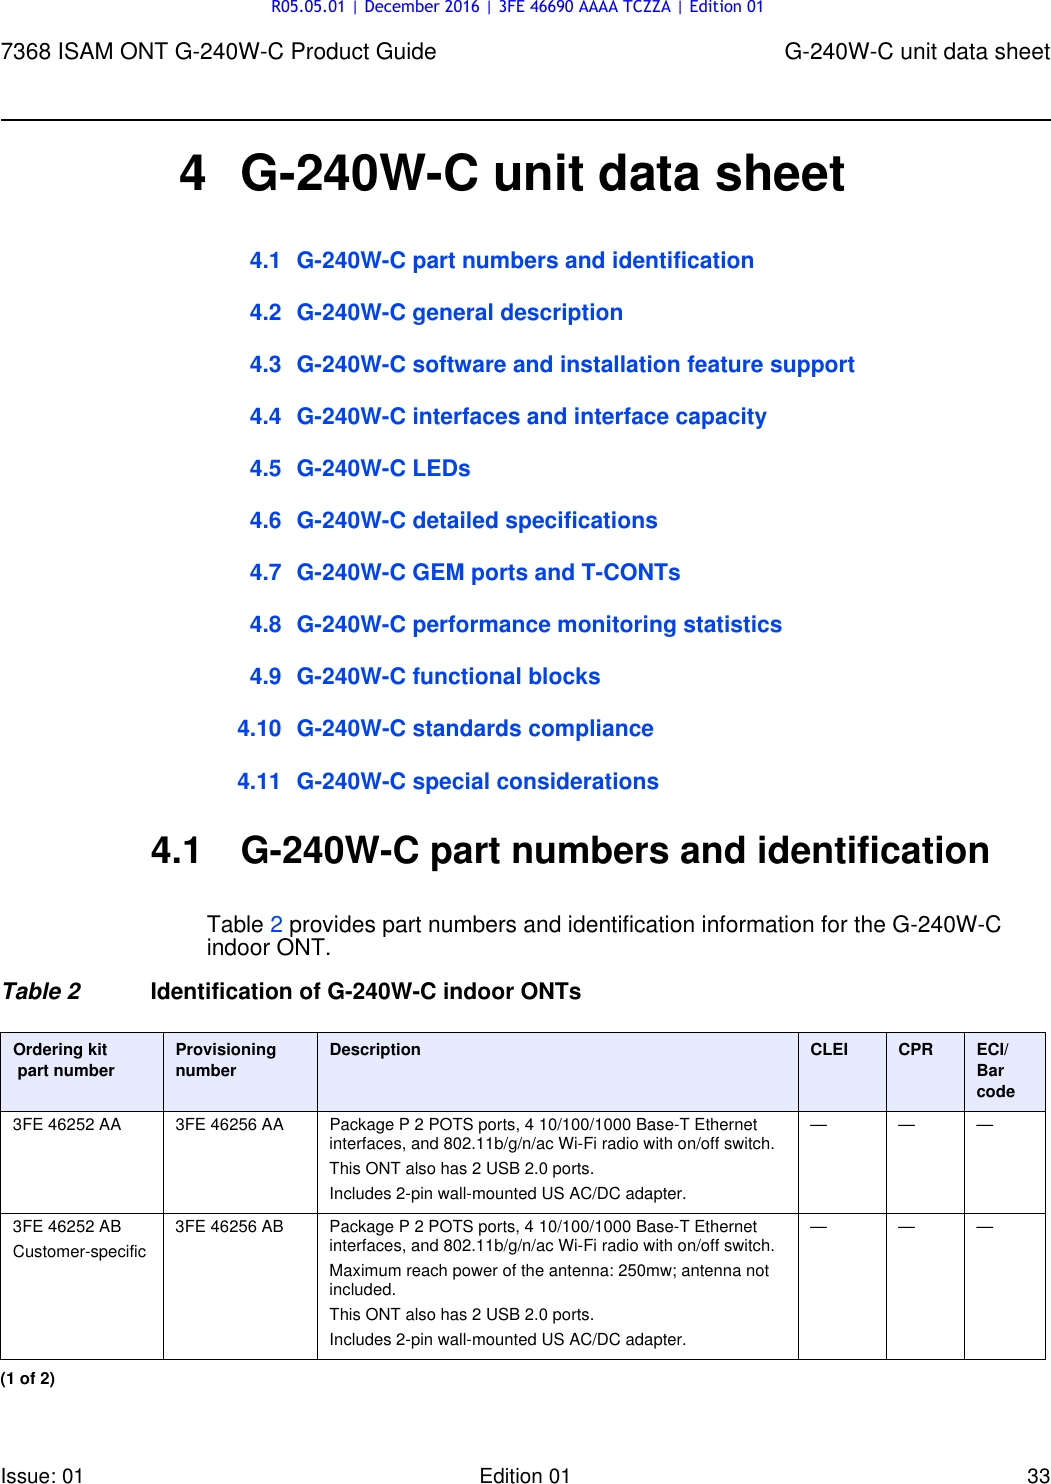 Page 33 of Nokia Bell G240W-C GPON ONU User Manual 7368 ISAM ONT G 240W B Product Guide